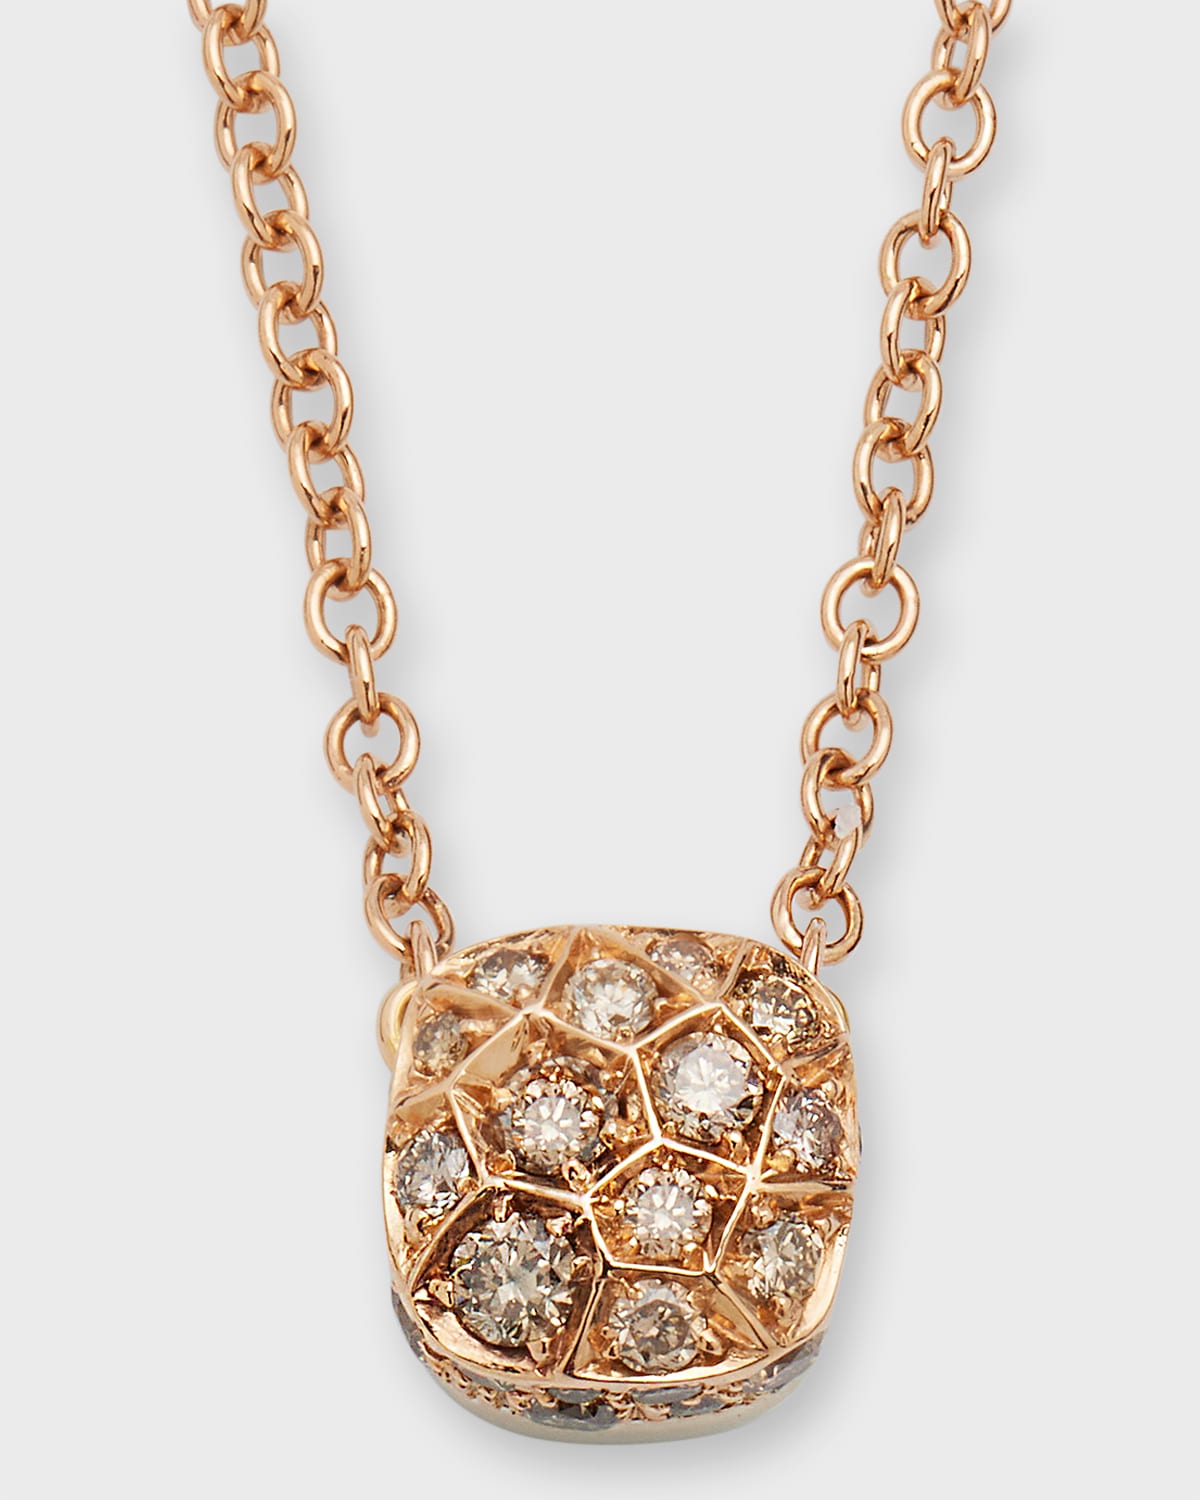 POMELLATO NUDO PETIT NECKLACE IN 18K ROSE AND WHITE GOLD WITH BROWN DIAMONDS